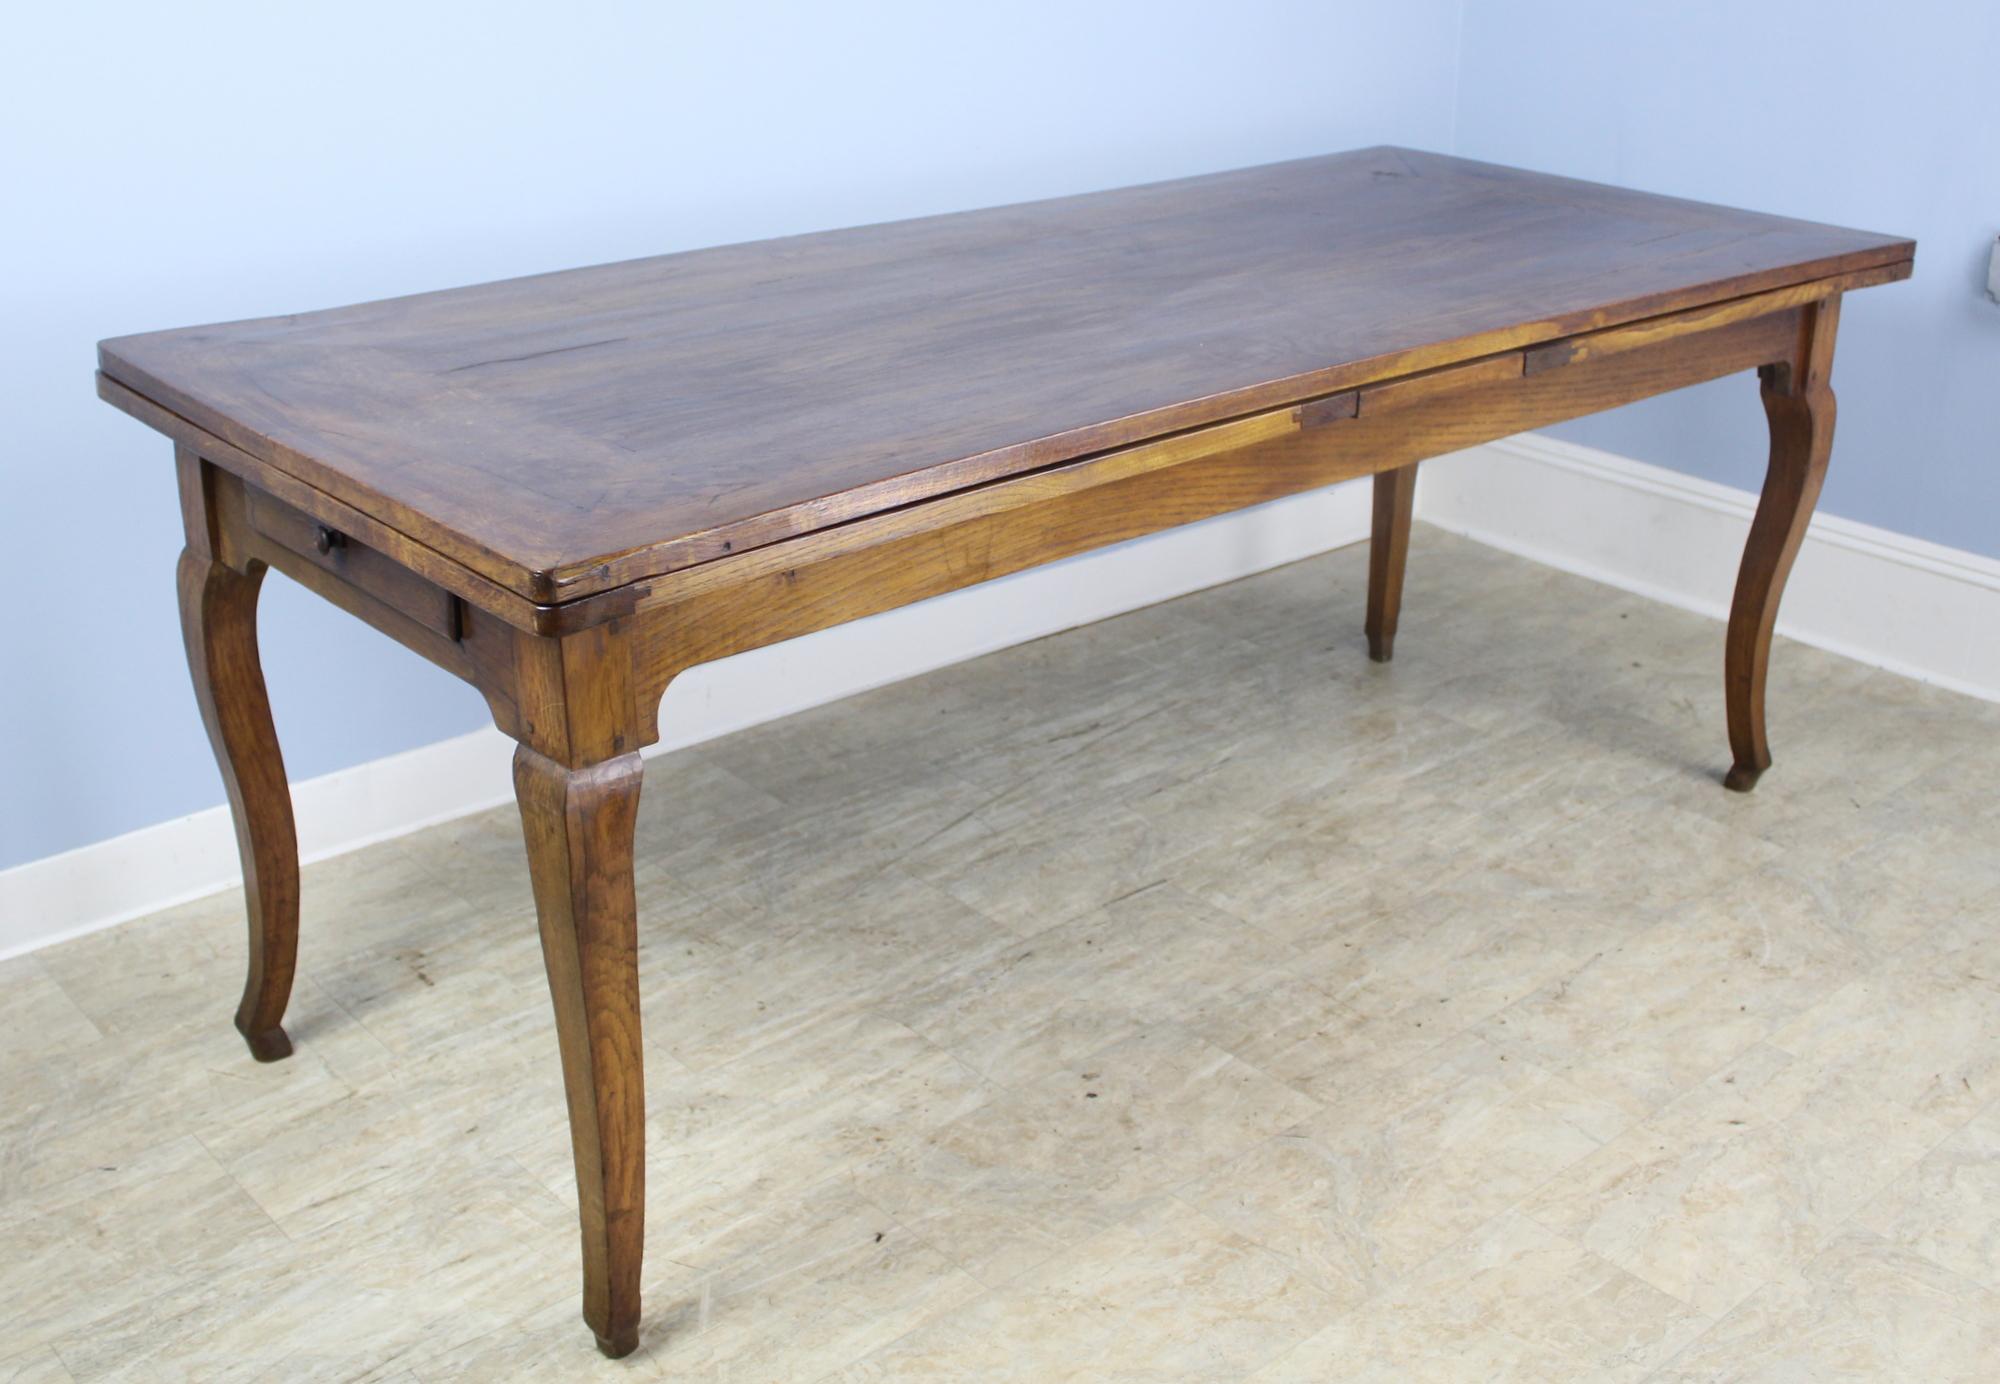 A pretty oak dining or farm table from France, with classic design details -mitred corners, cabriole legs, and hoof feet - with a twist! This table extends to 145 inches -over 12 feet long, when both 34 inch draw leaves are extended. When opened,